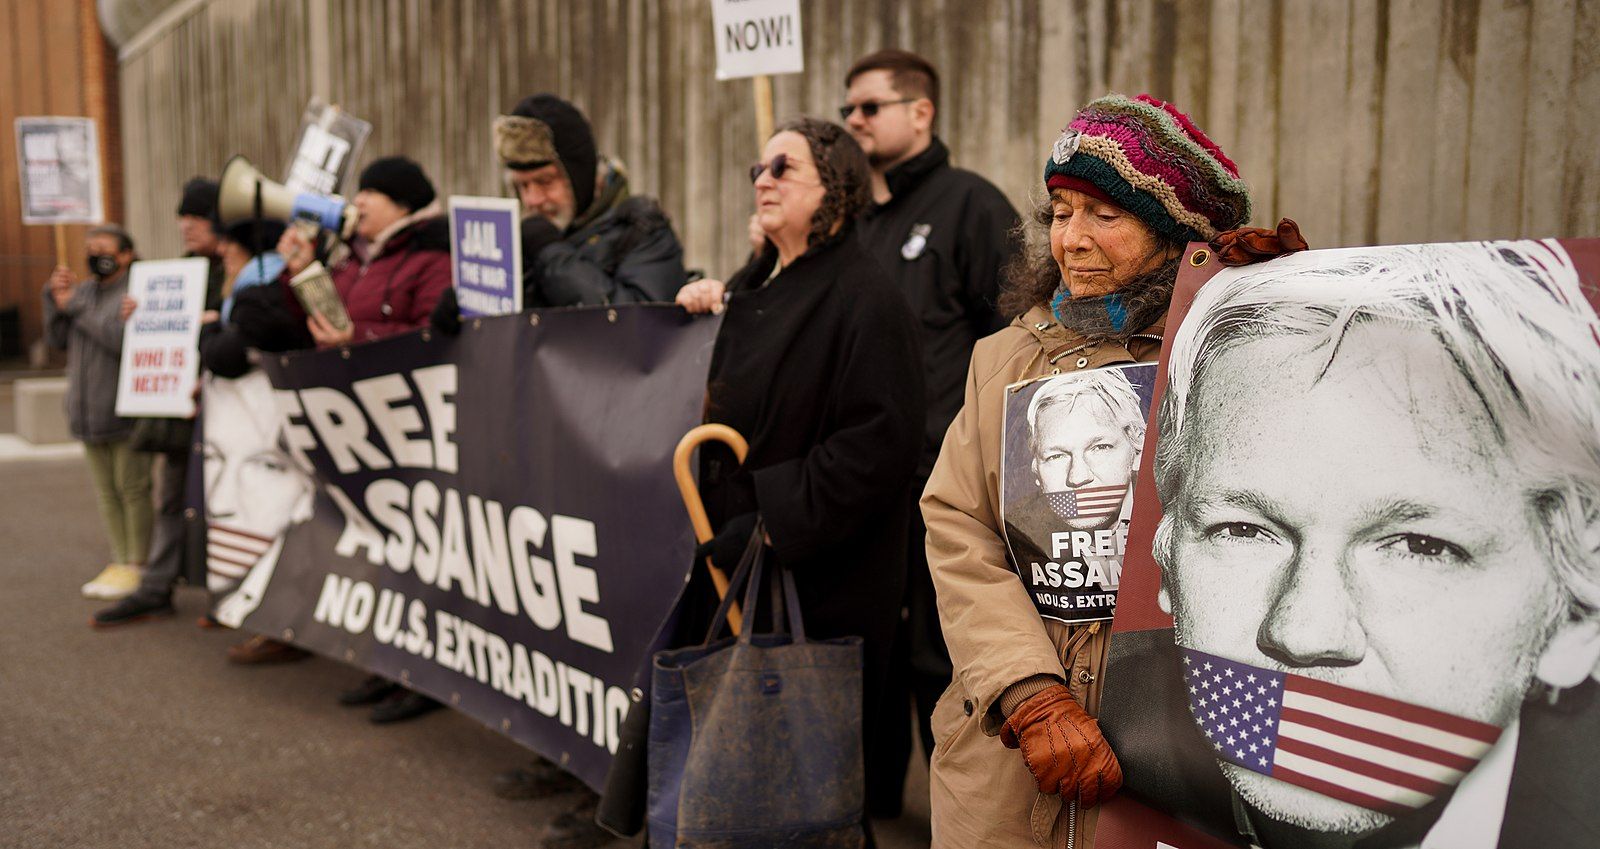 Assange Extradition Highlights Hypocrisy of West’s ‘Free Press’ Ethos, Critics Say